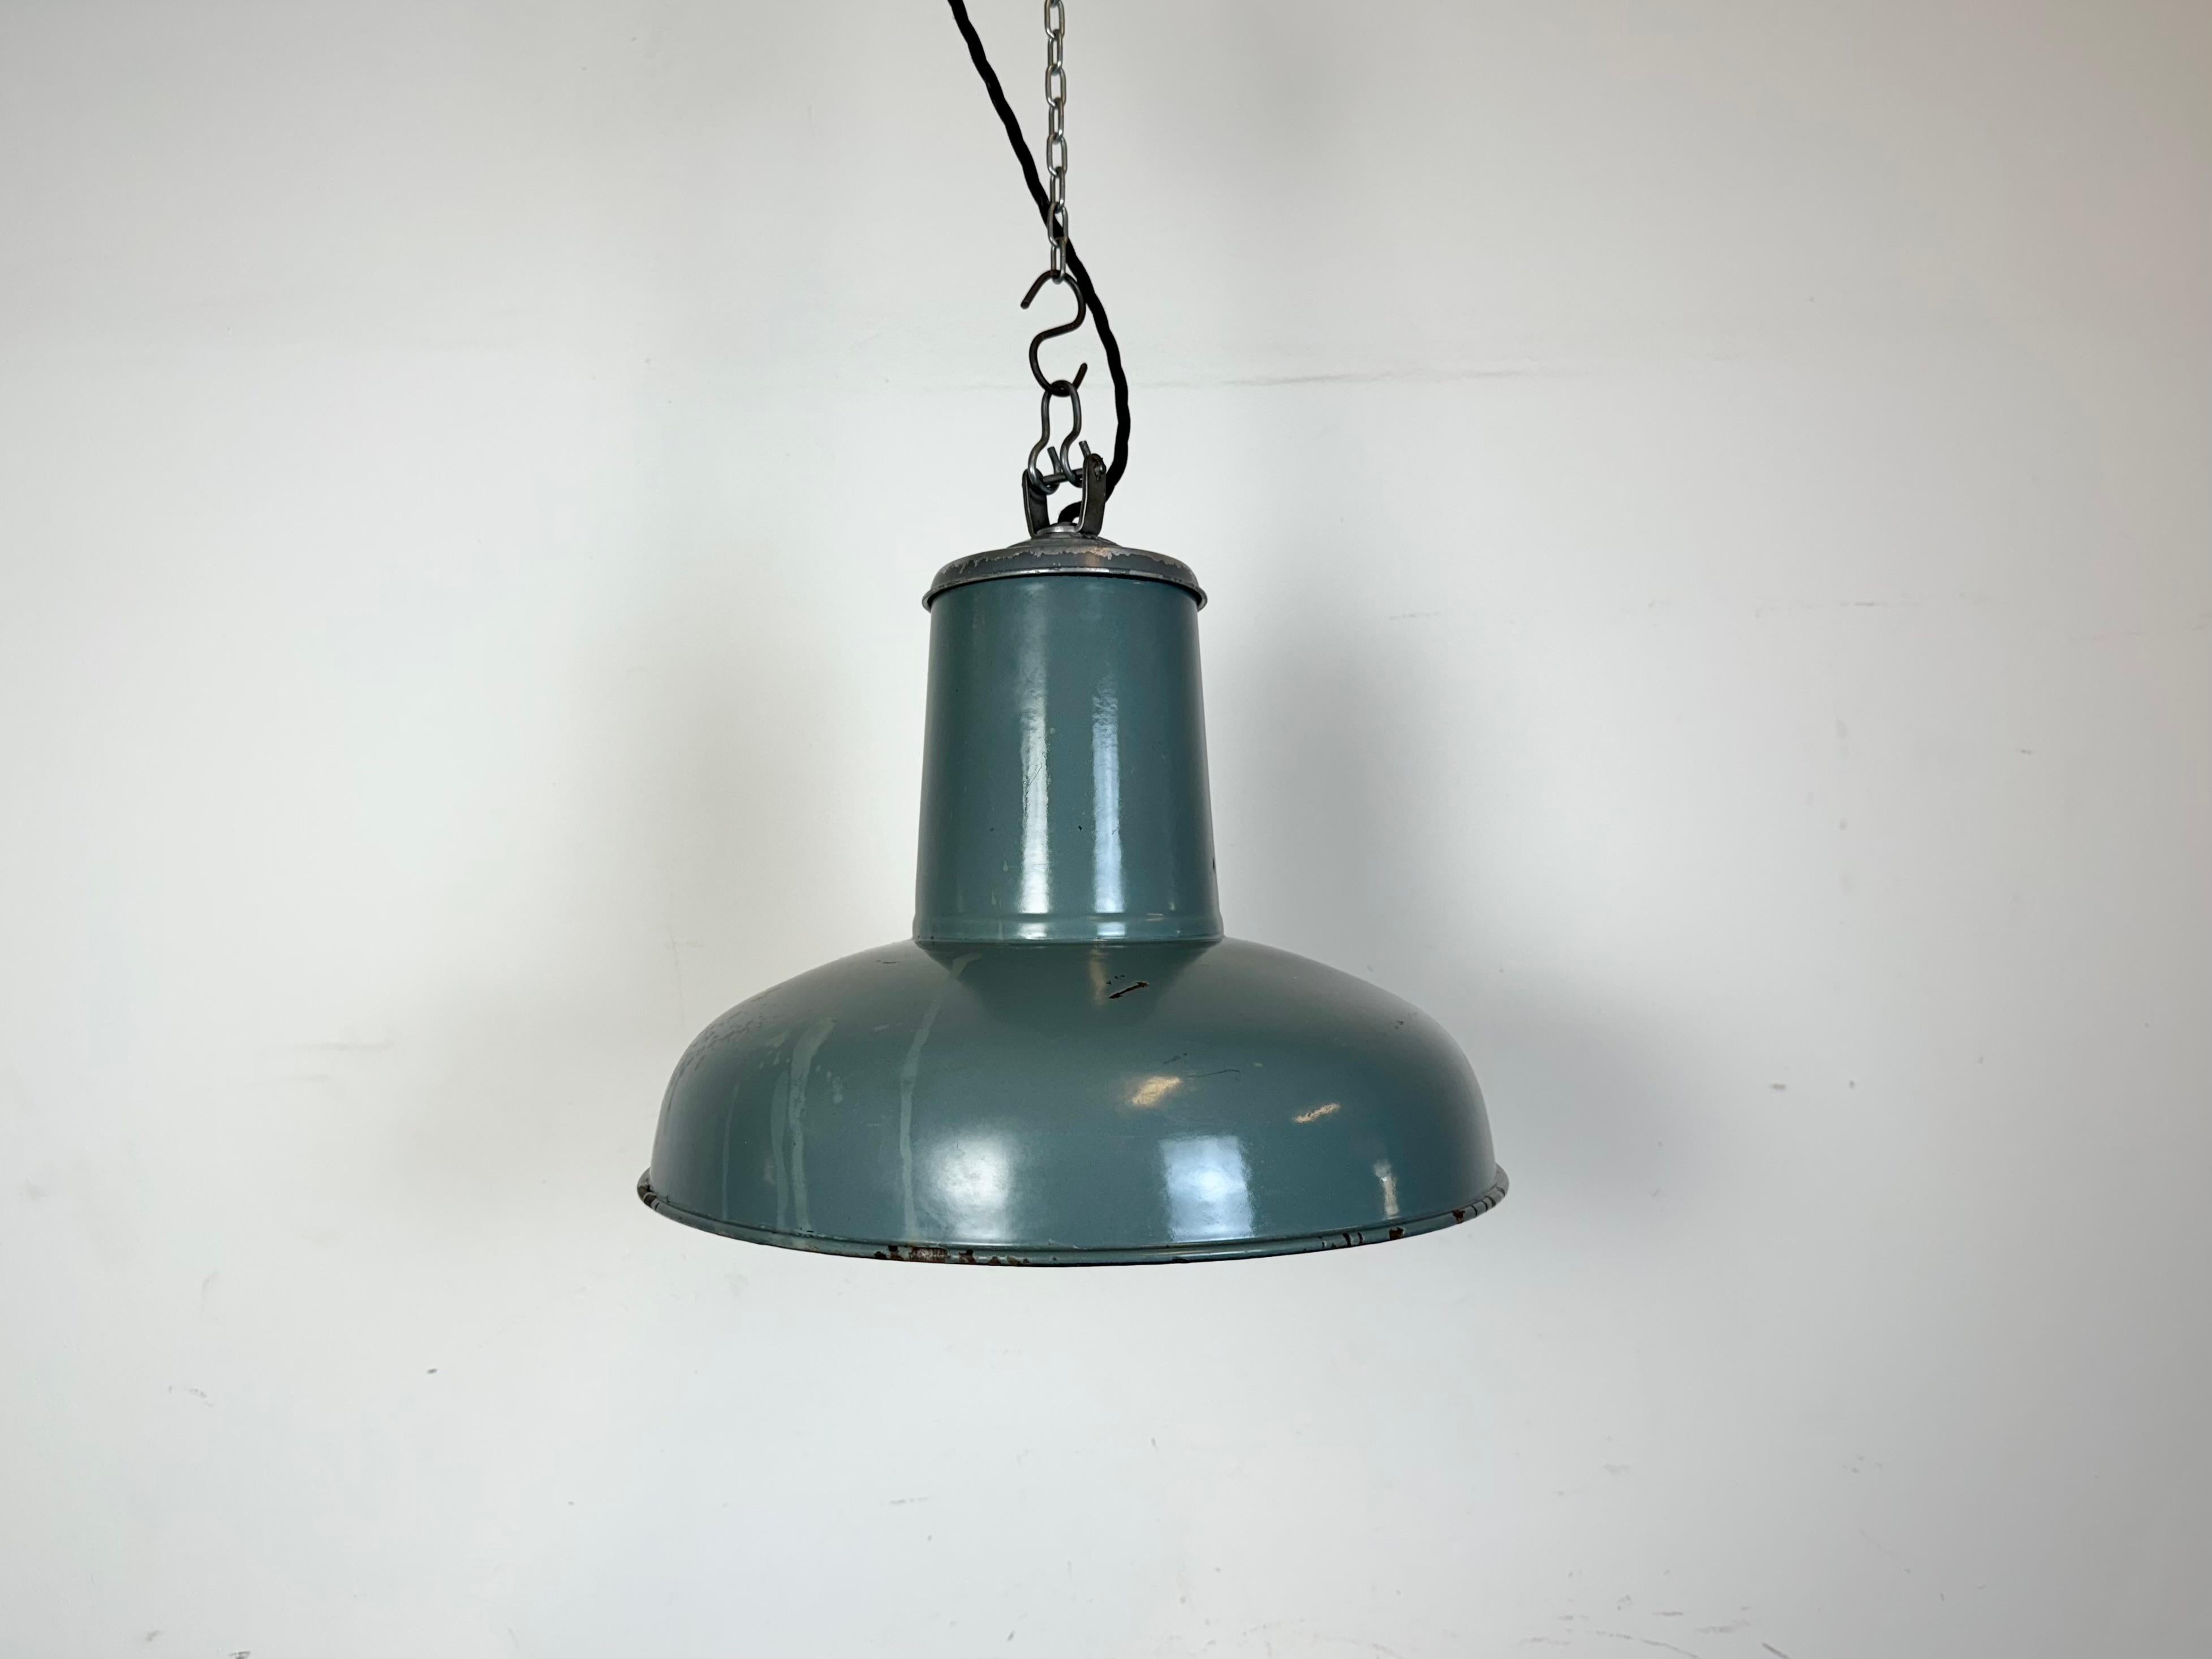 Industrial grey enamel pendant light made by Siemens in Germany during the 1930s. White enamel inside the shade. Iron top. The porcelain socket requires standard E 27/ E26 light bulbs. New wire. Fully functional. The weight of the lamp is 2,2 kg. 